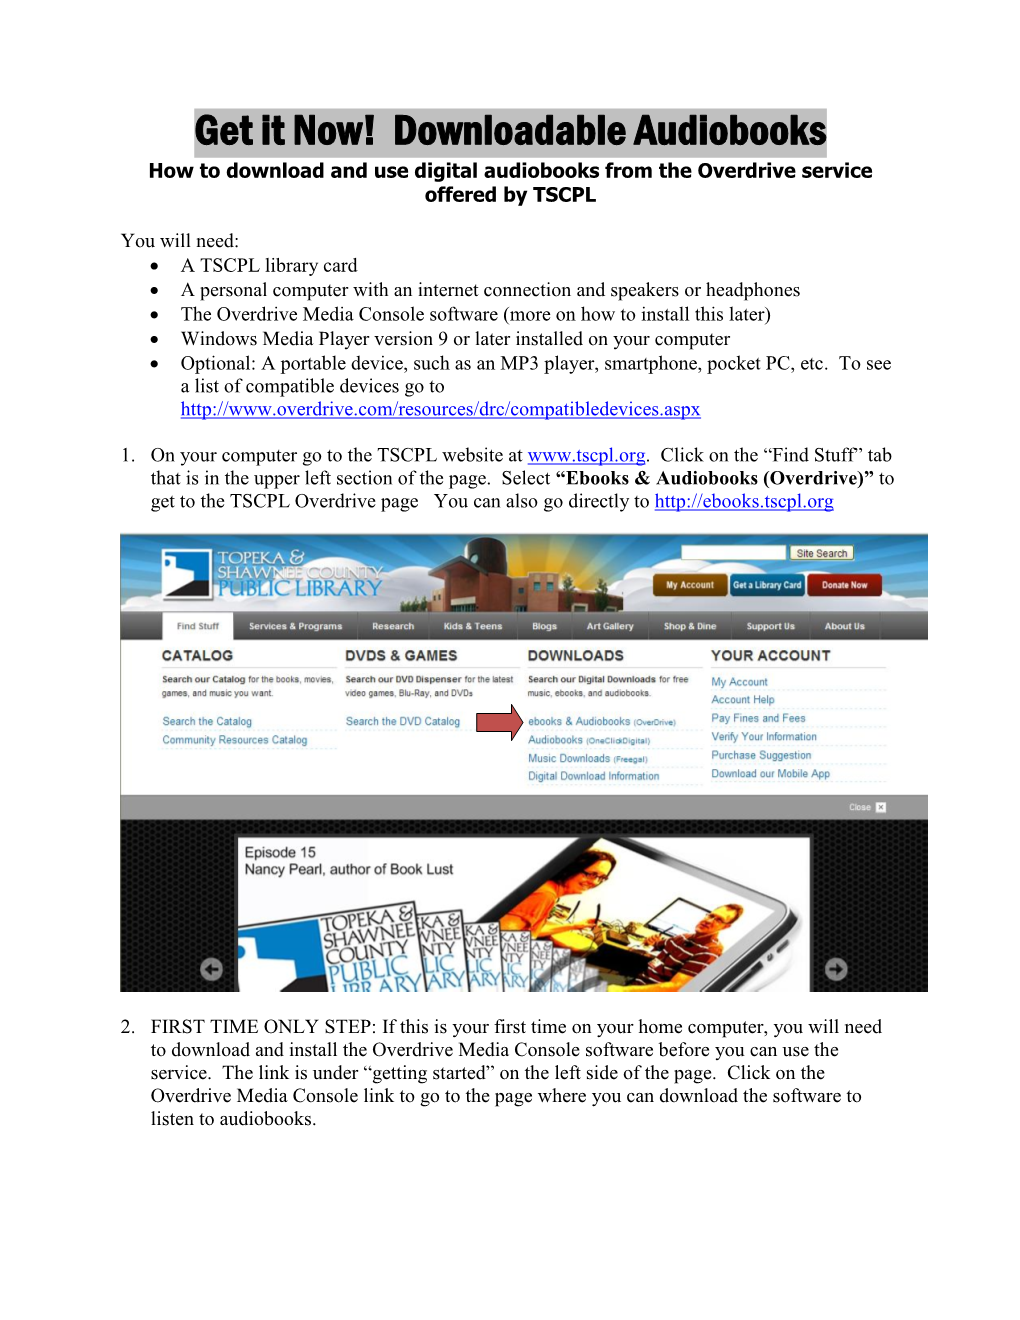 How to Download and Use E-Audiobooks from the Overdrive Service Offered by the State Library of Kansas